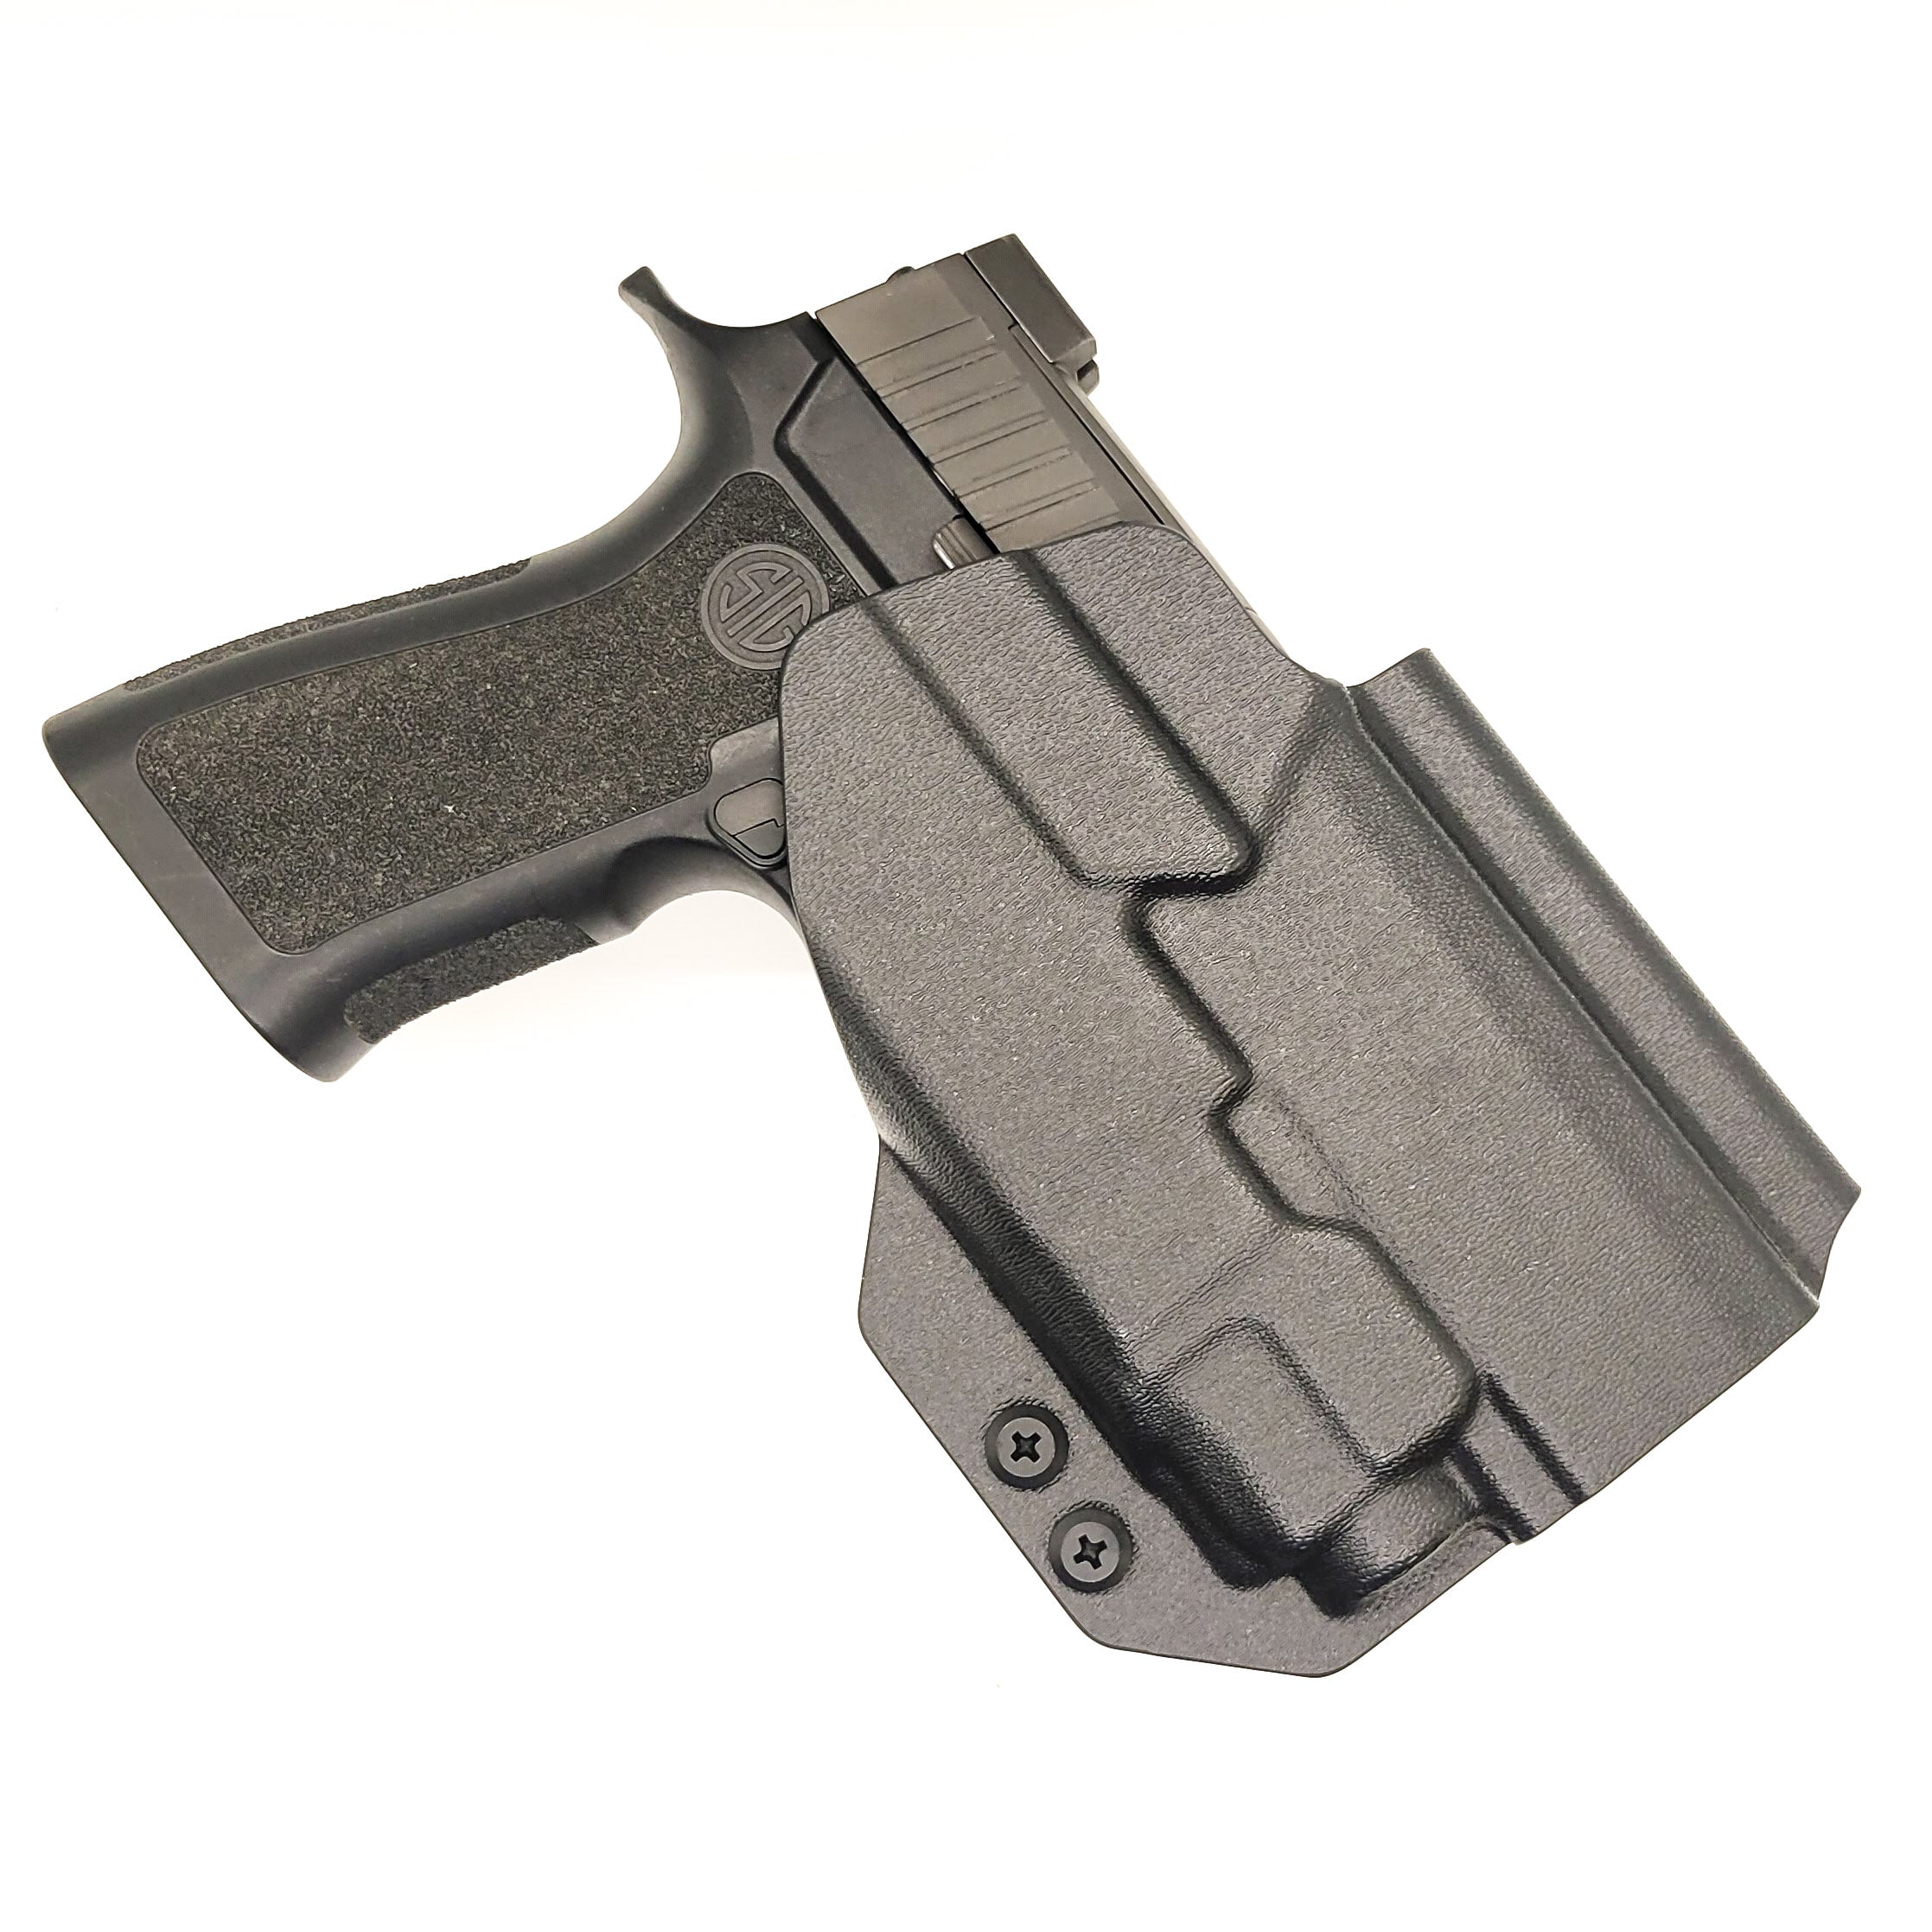 Outside Waistband Holster designed to fit the Sig Sauer P320 Compact, Carry, and M18 pistols with the Streamlight TLR-8 or TLR-8A light and GoGuns USA Gas Pedal mounted to the pistol.